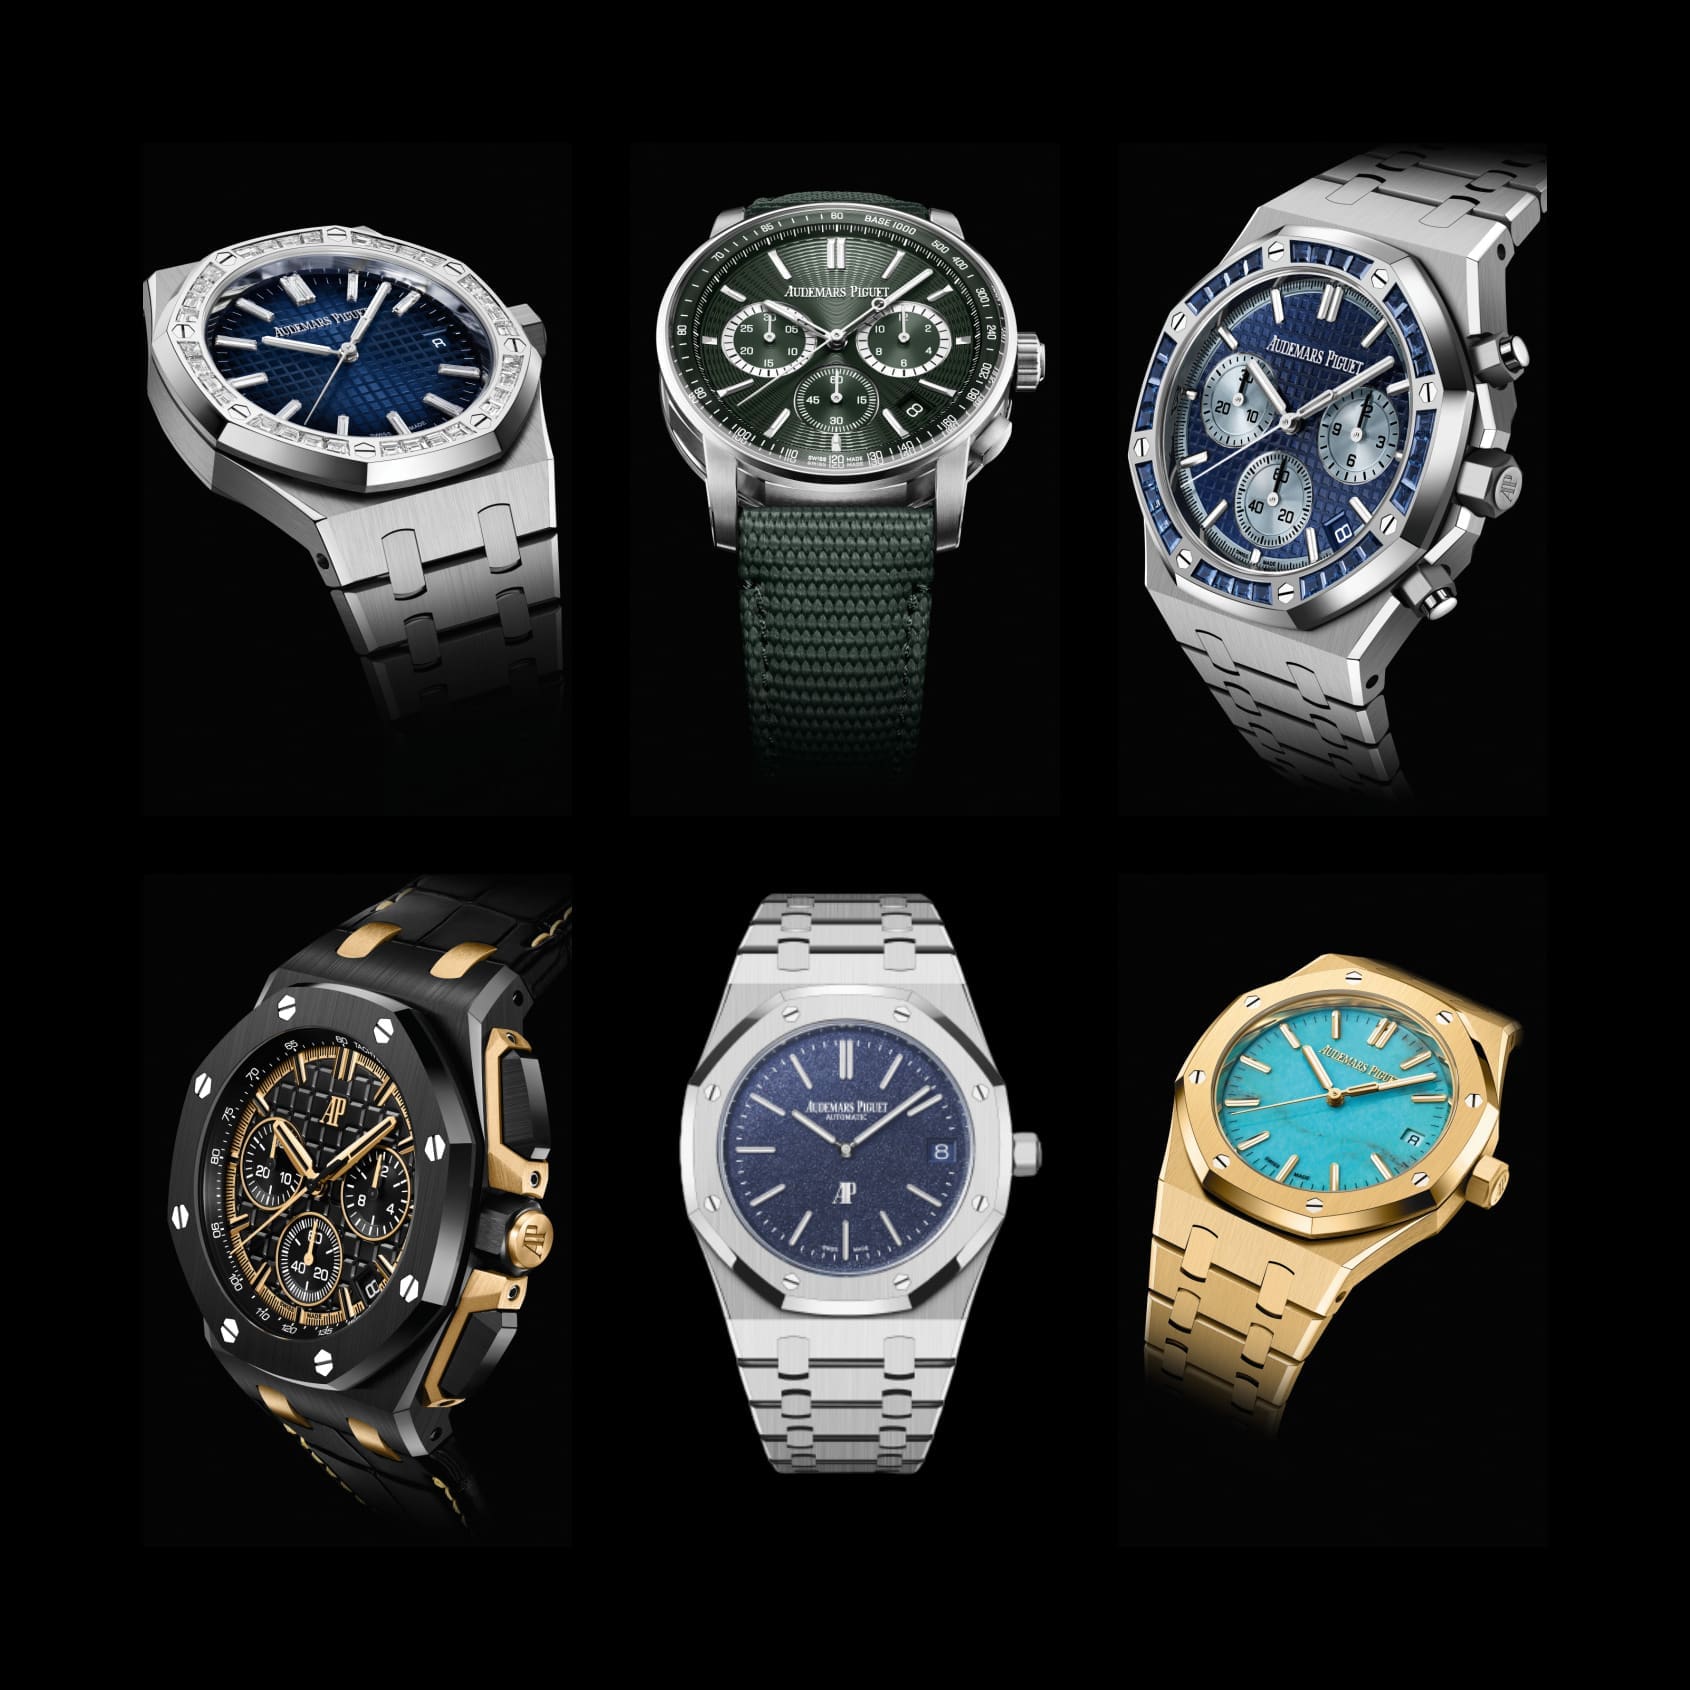 AP Social Club Day 1: First-ever steel Code 11.59s, new grained dial Royal Oak Jumbo, and more…